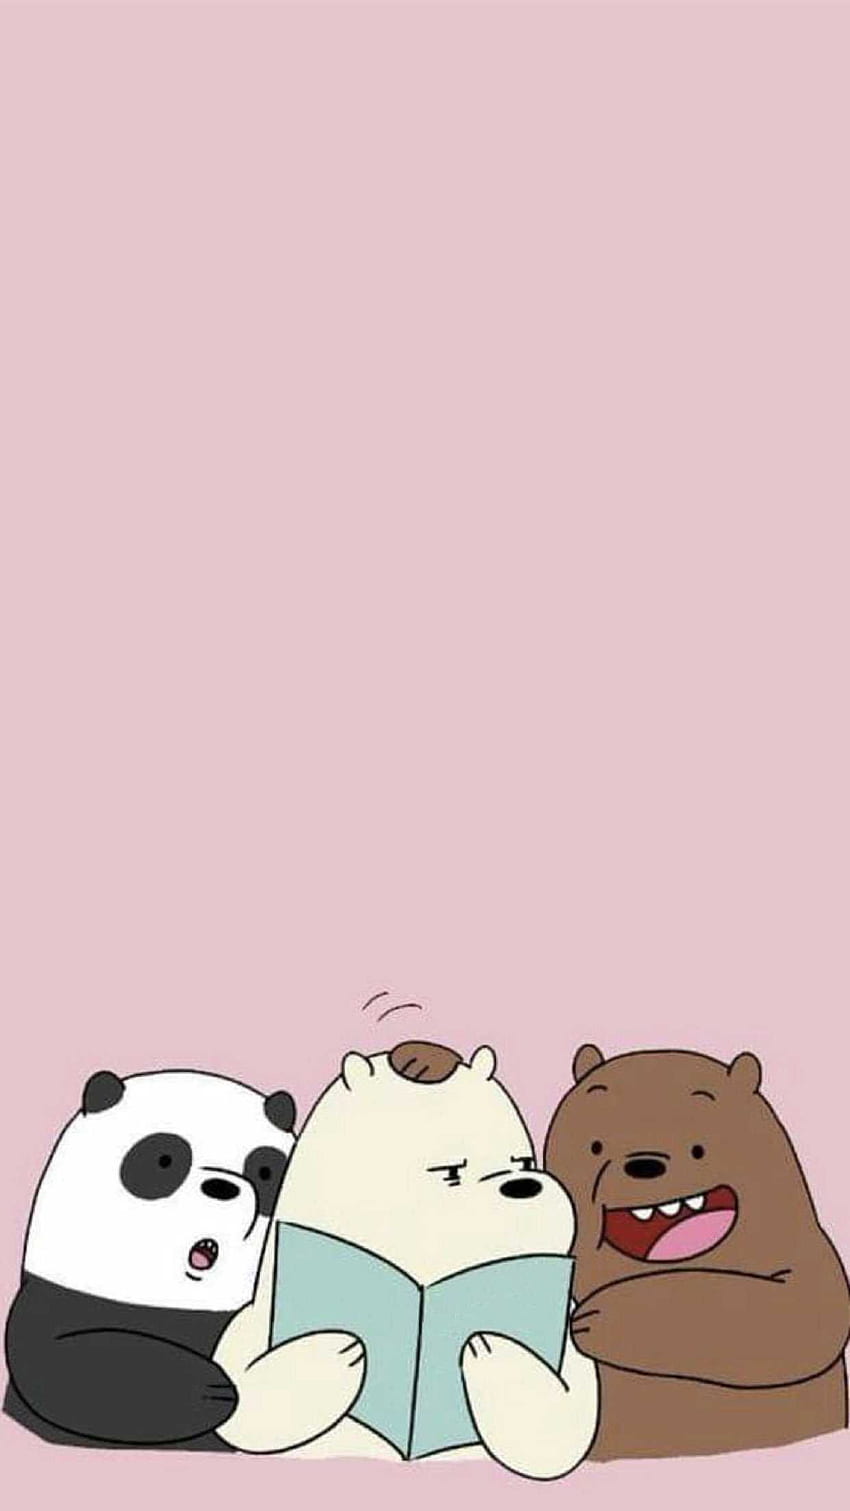 Ice bear wallpaper for iPhone 11  riphonewallpapers